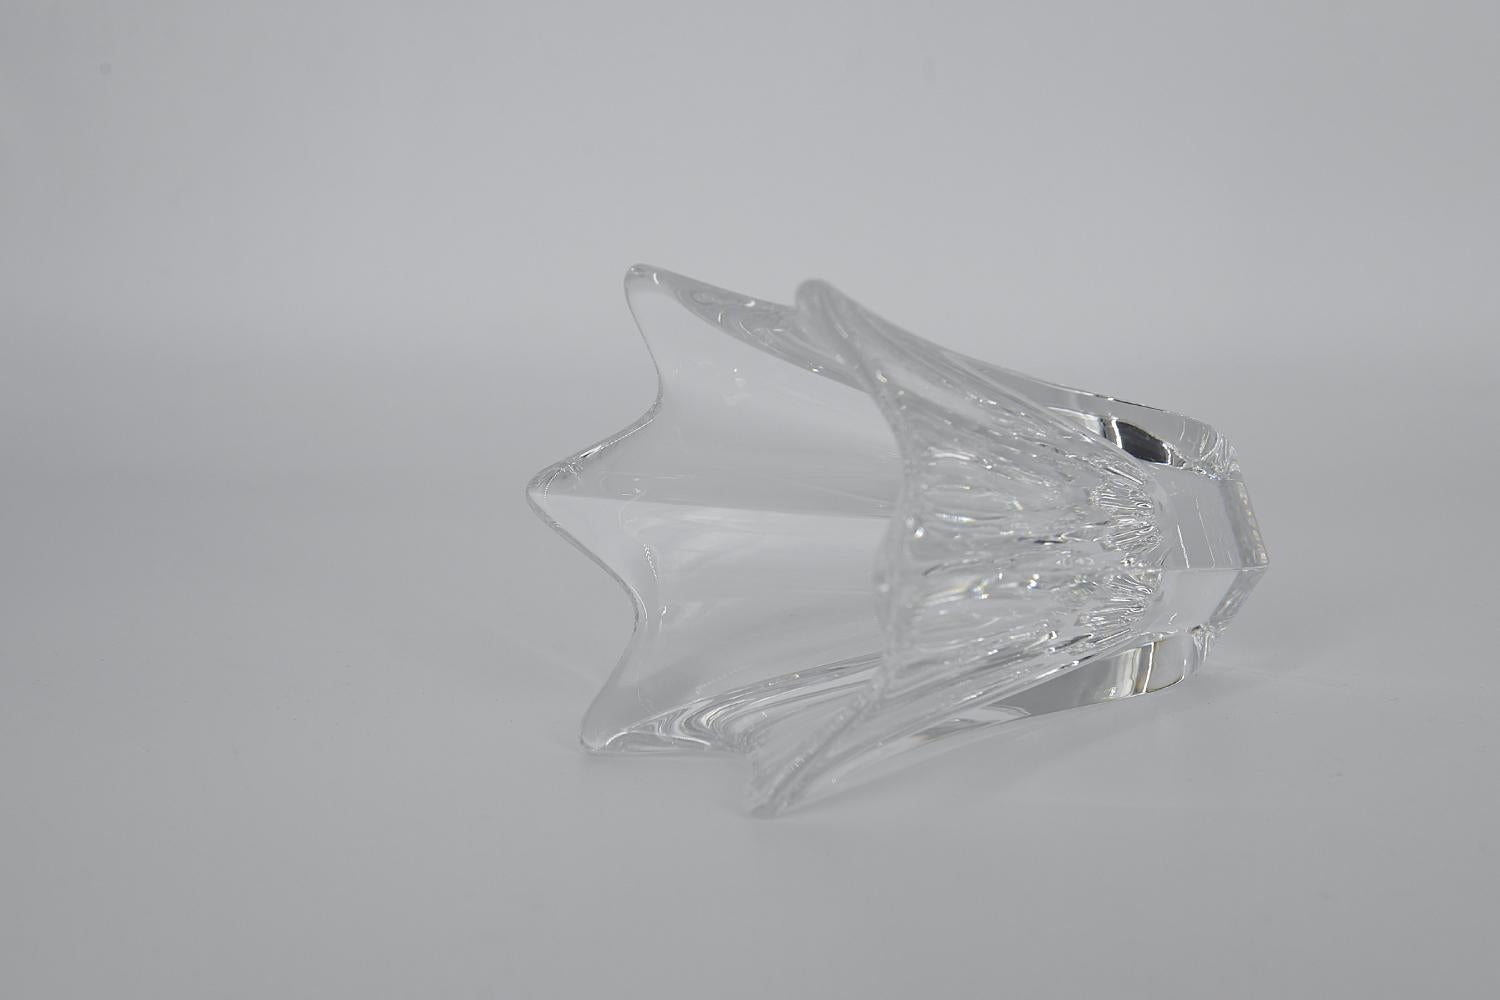 This Tulip crystal vase was designed by Jan Johansson for the Swedish glassworks Orrefors during the 1970s. Transparent vase made of lead art crystal glass. It is shaped like a tulip with six petals.

Jan Johansson was born in 1942. He came to